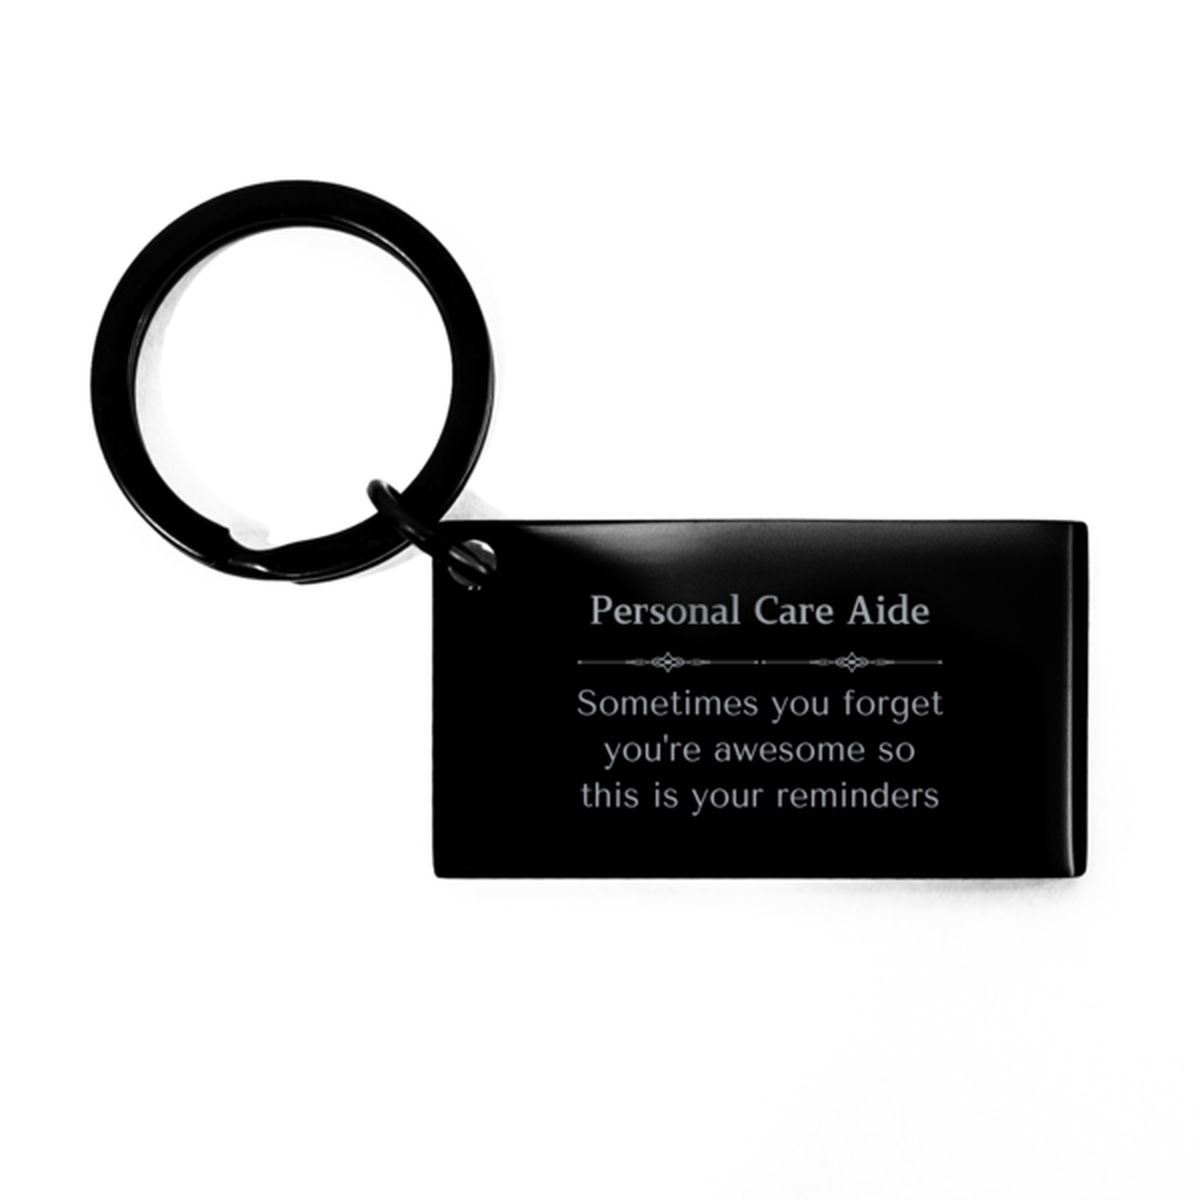 Sentimental Personal Care Aide Keychain, Registered Nurse Sometimes you forget you're awesome so this is your reminders, Graduation Christmas Birthday Gifts for Personal Care Aide, Men, Women, Coworkers